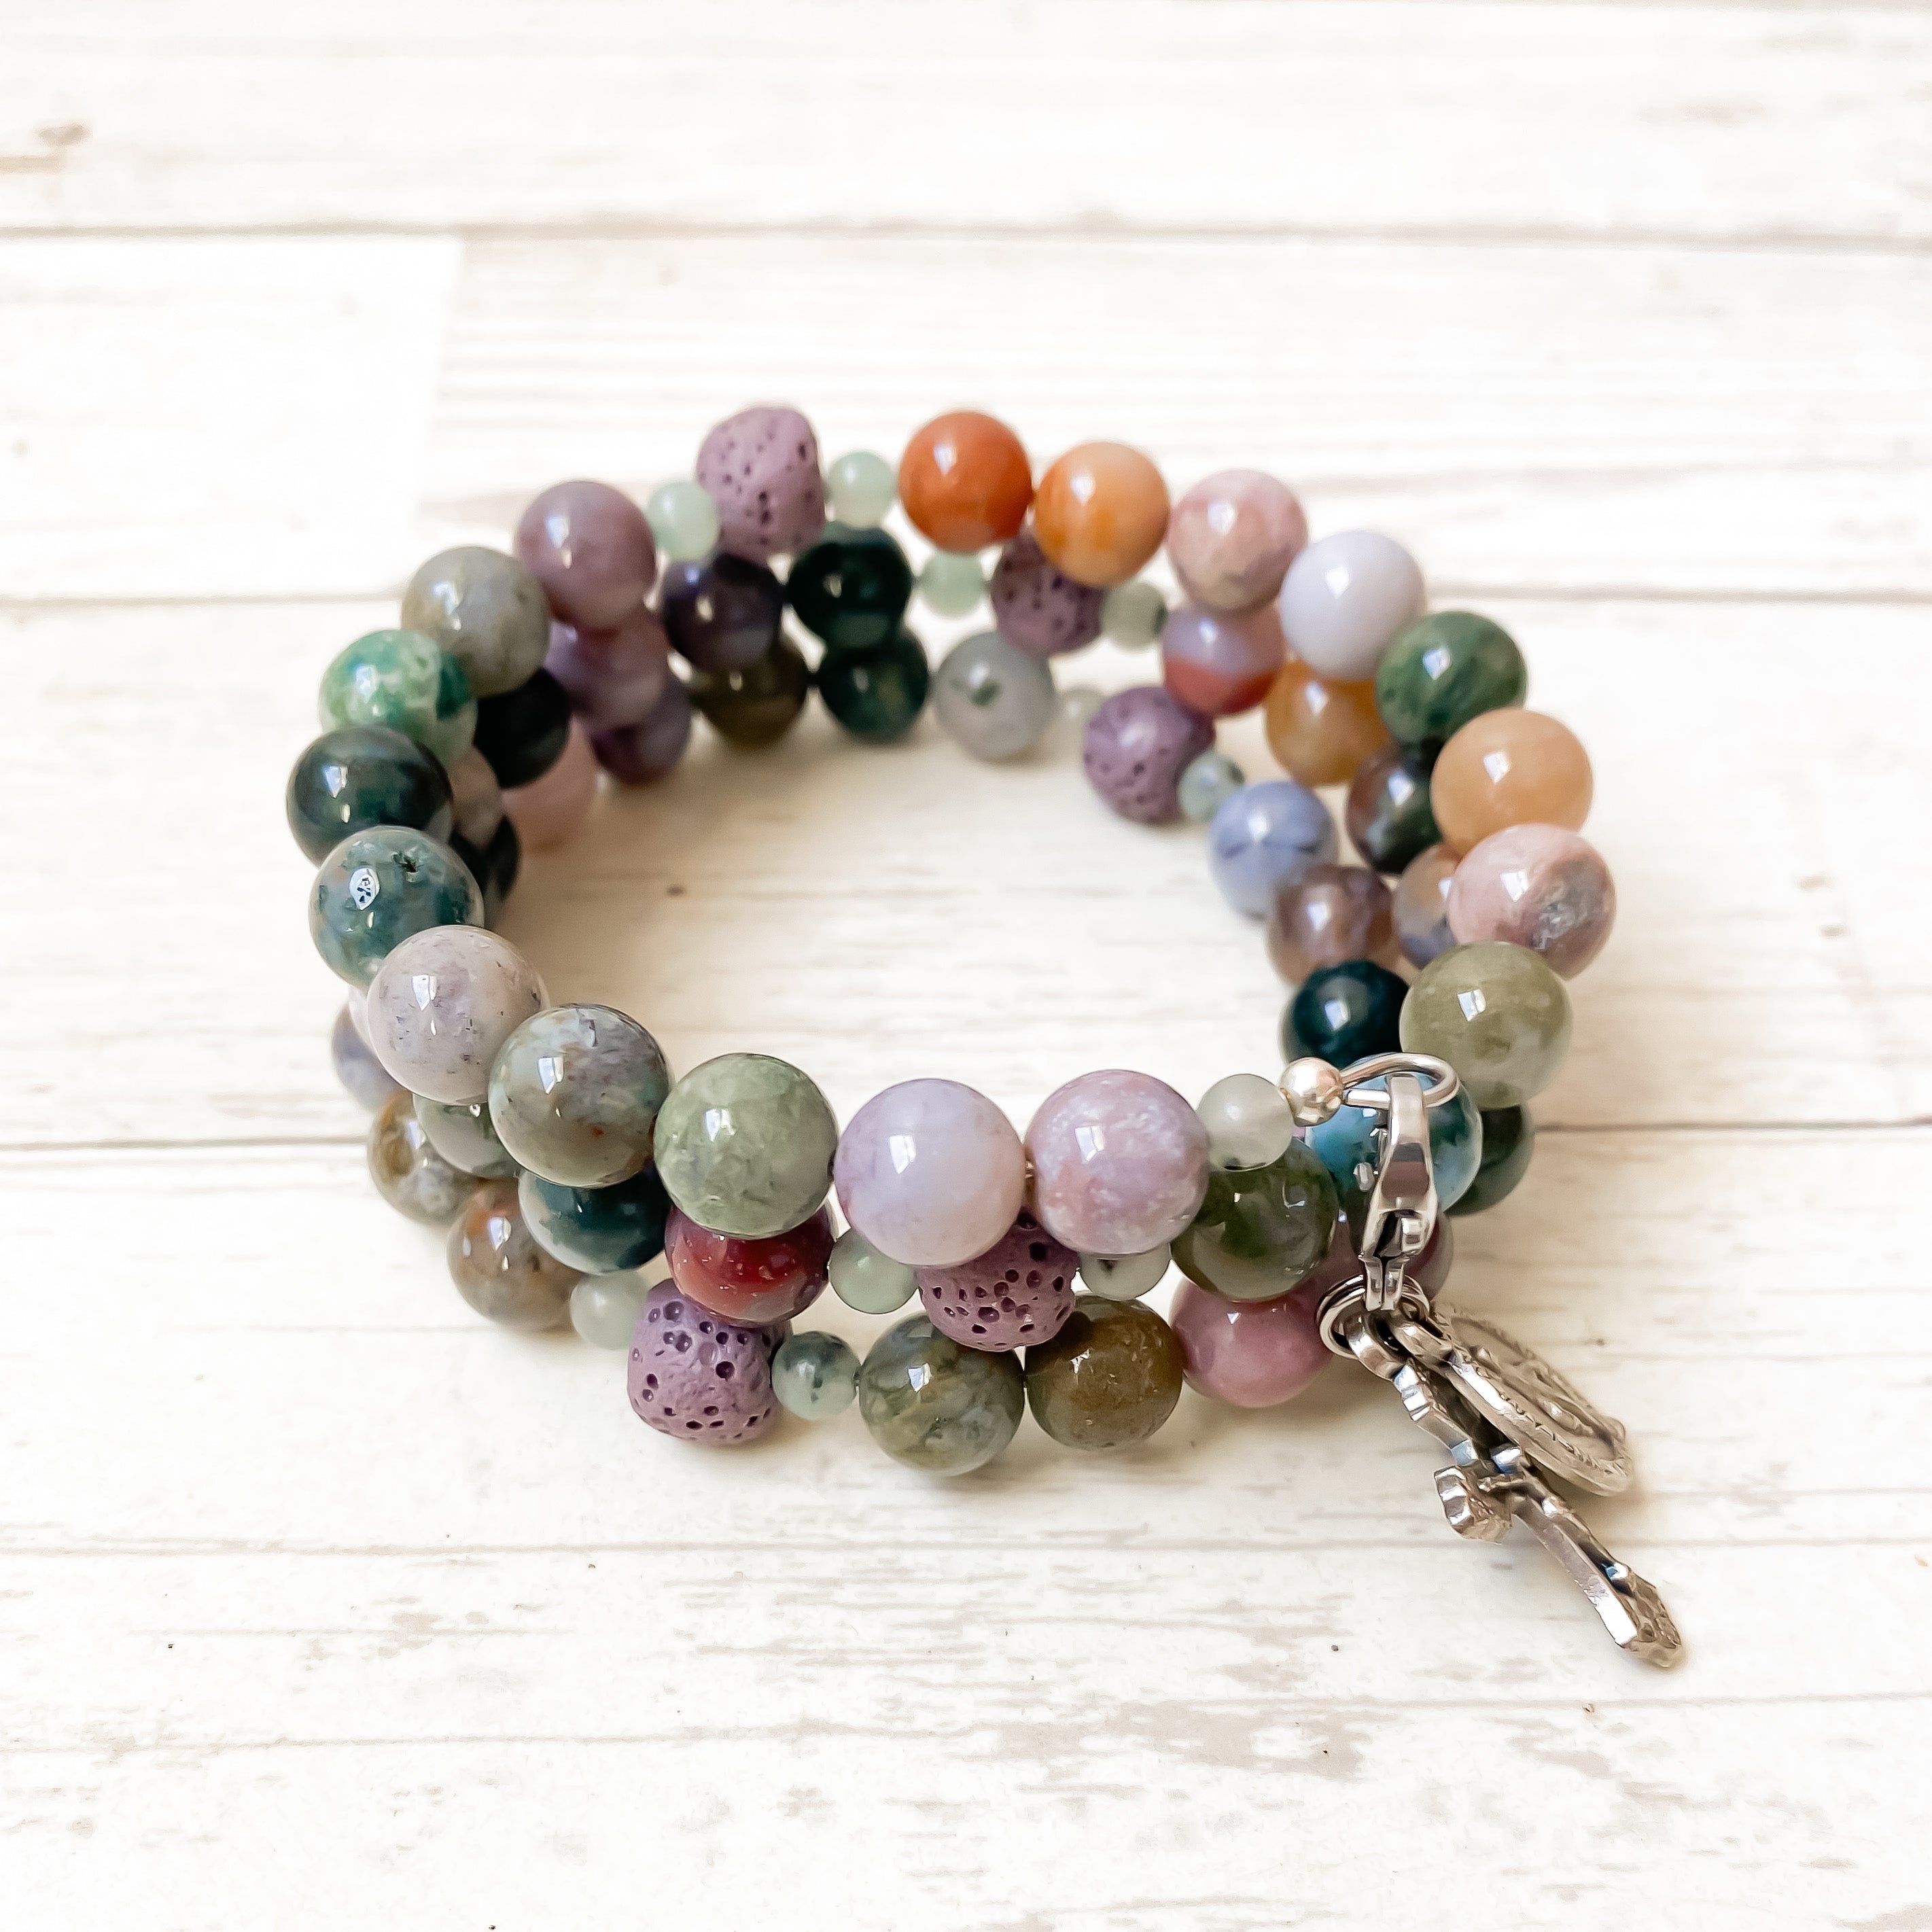 life-rox-gemstones-our-lady-of-lourdes-memory-wire-rosary-bracelet-essential-oil-diffuser-beads-31349525512368.jpg